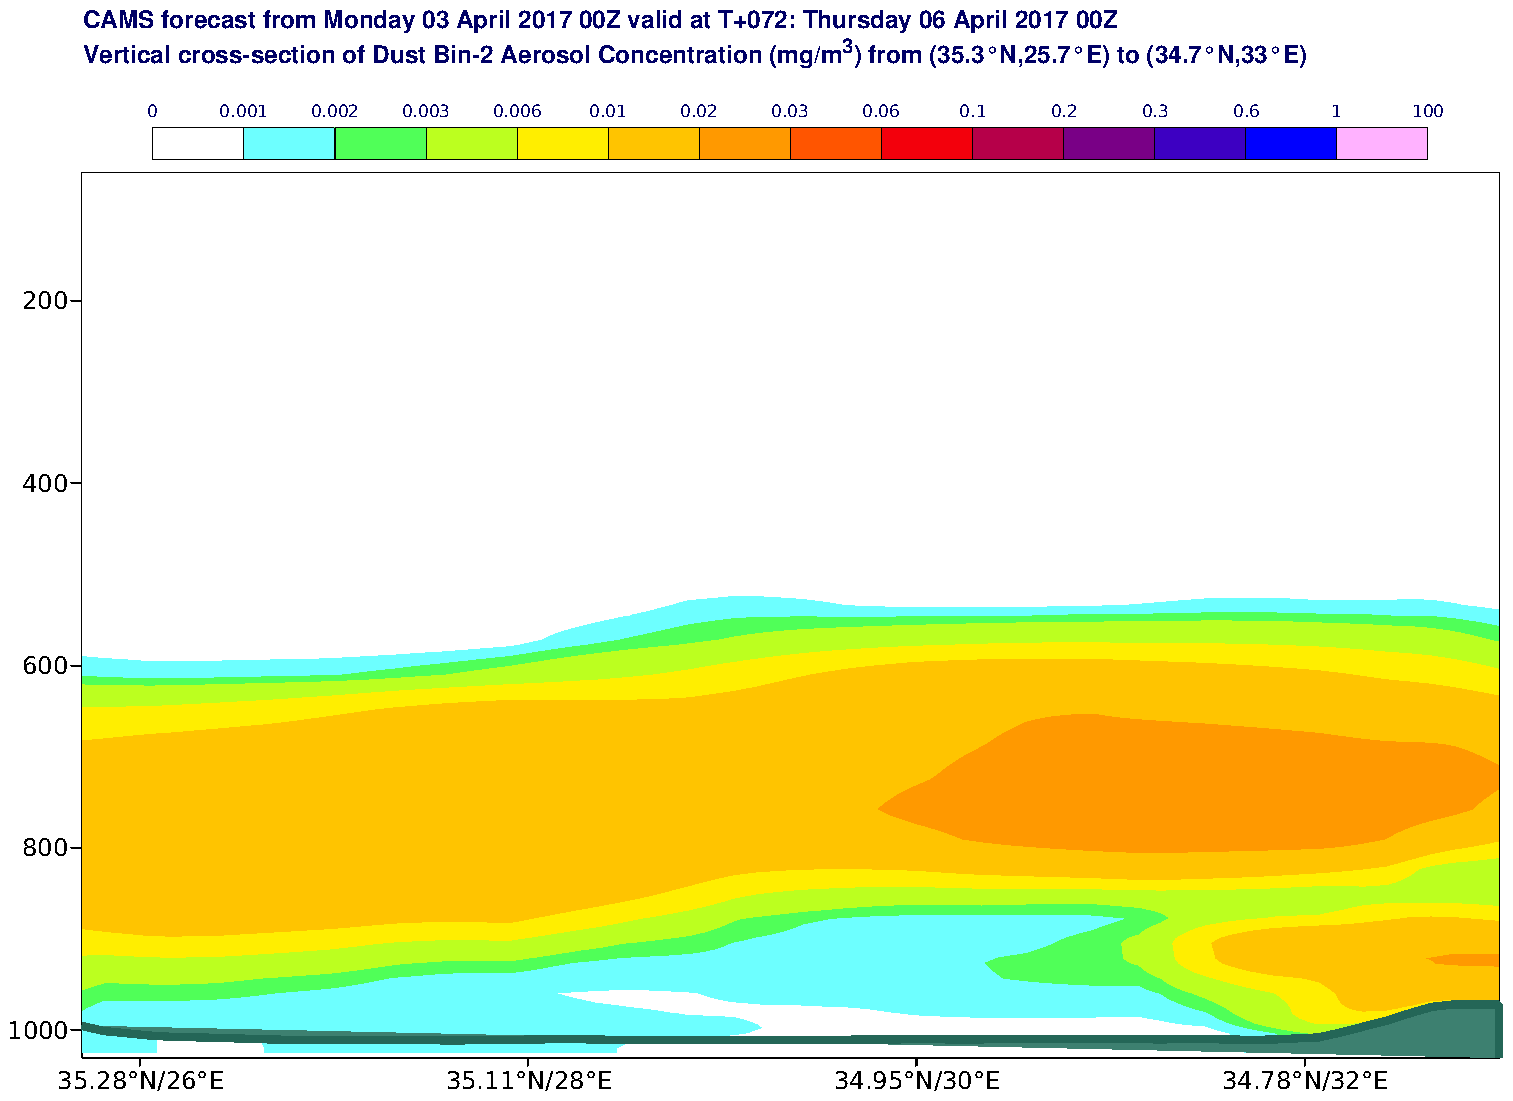 Vertical cross-section of Dust Bin-2 Aerosol Concentration (mg/m3) valid at T72 - 2017-04-06 00:00